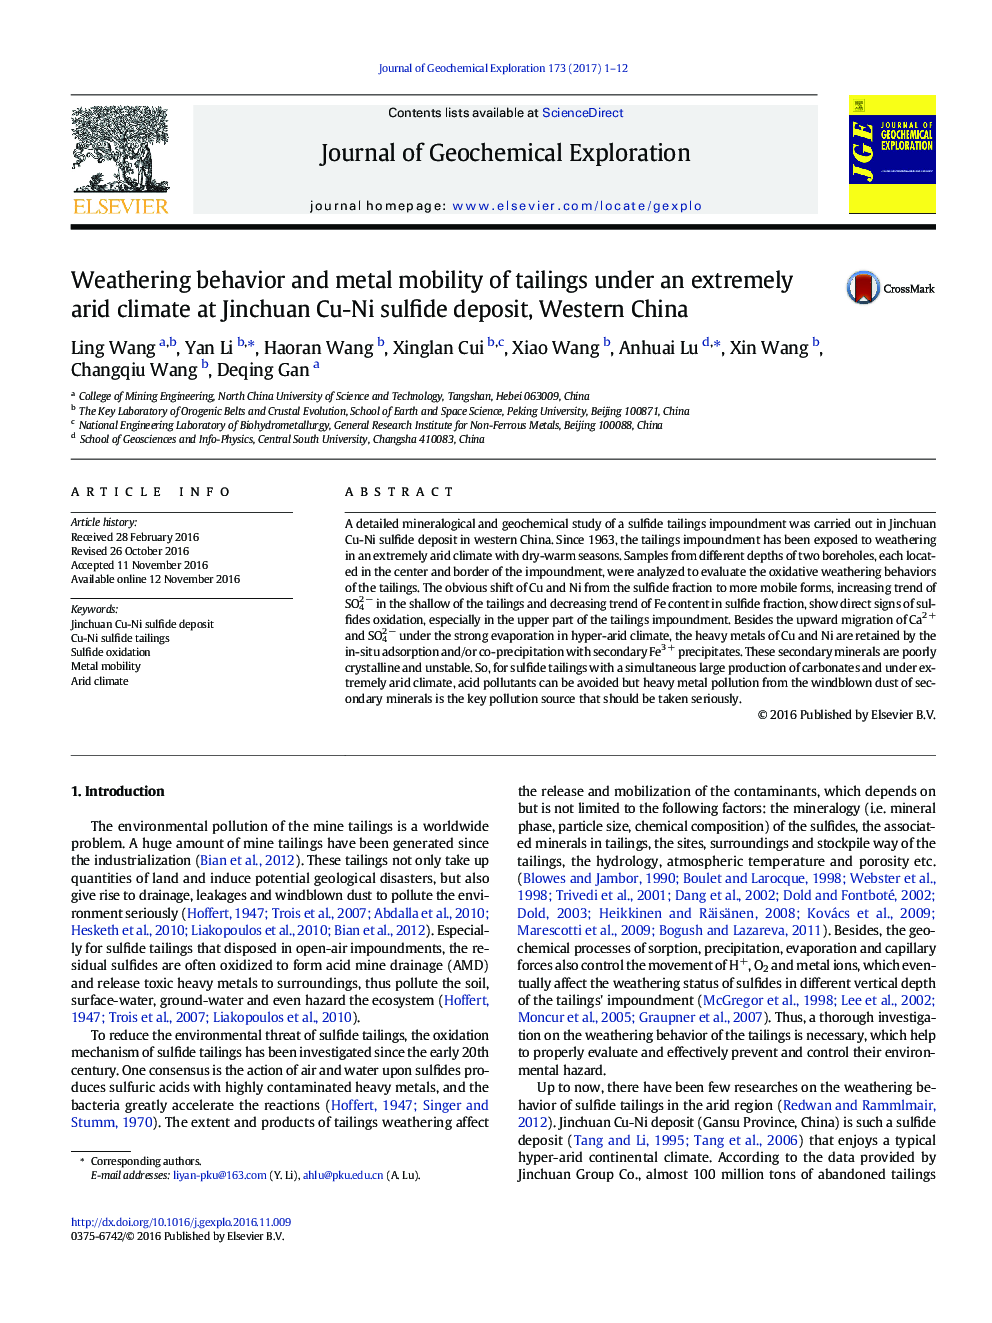 Weathering behavior and metal mobility of tailings under an extremely arid climate at Jinchuan Cu-Ni sulfide deposit, Western China